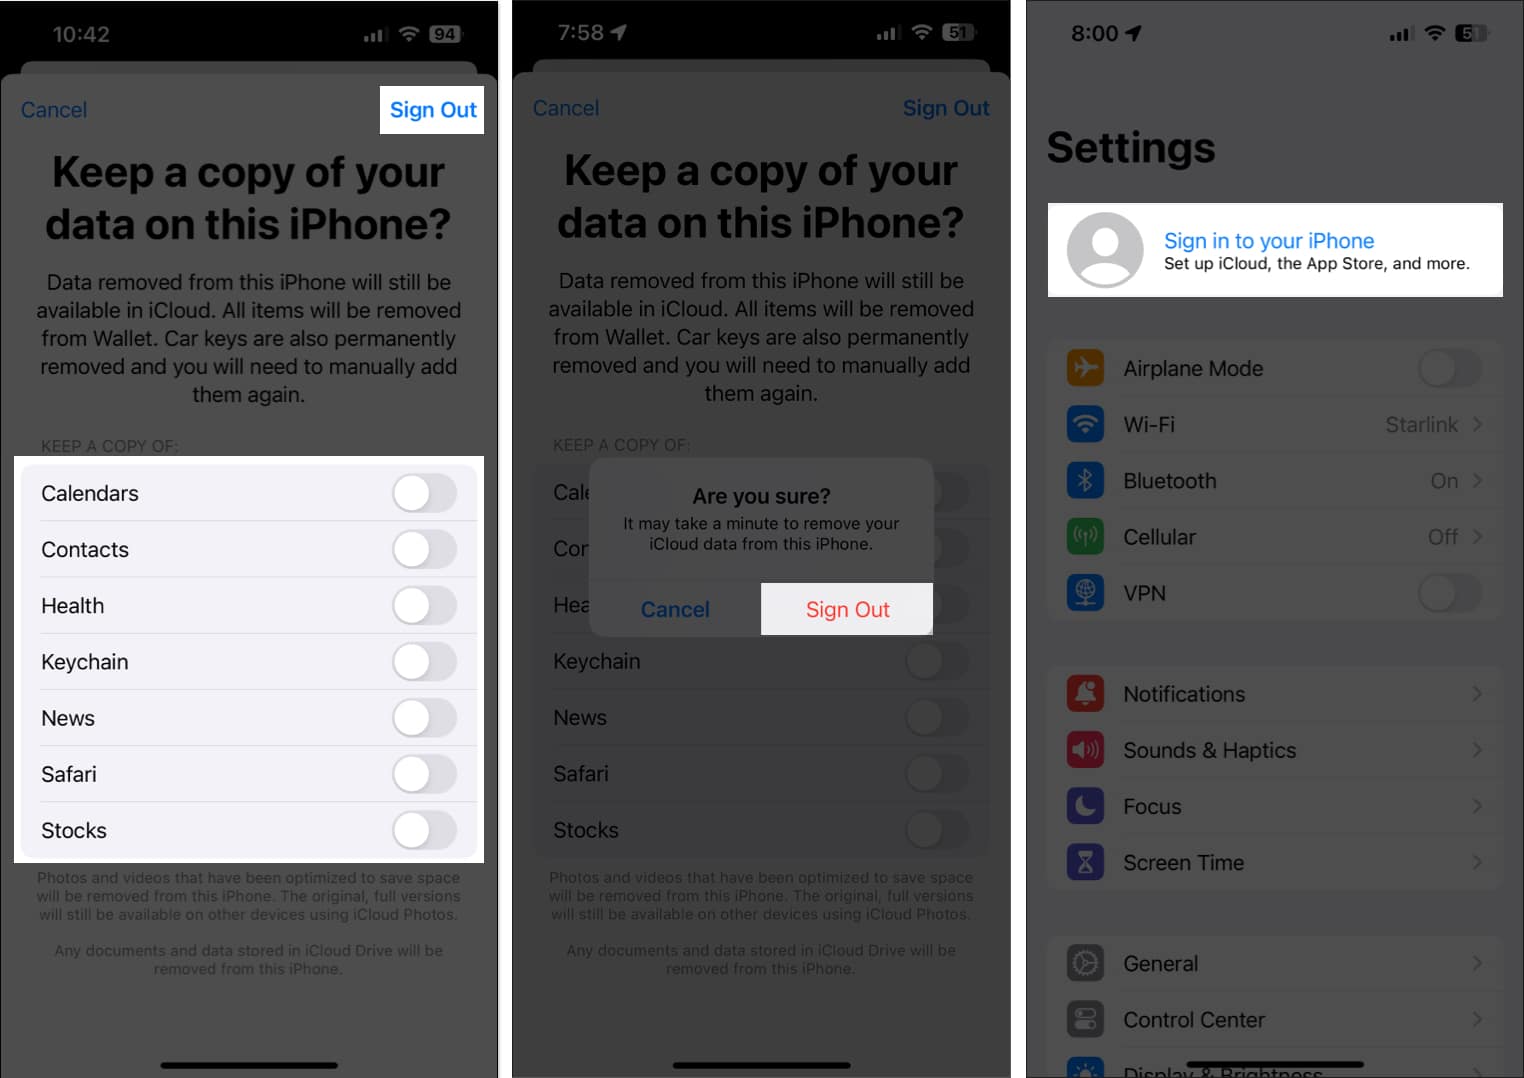 Save data offline and sign in again to your apple ID